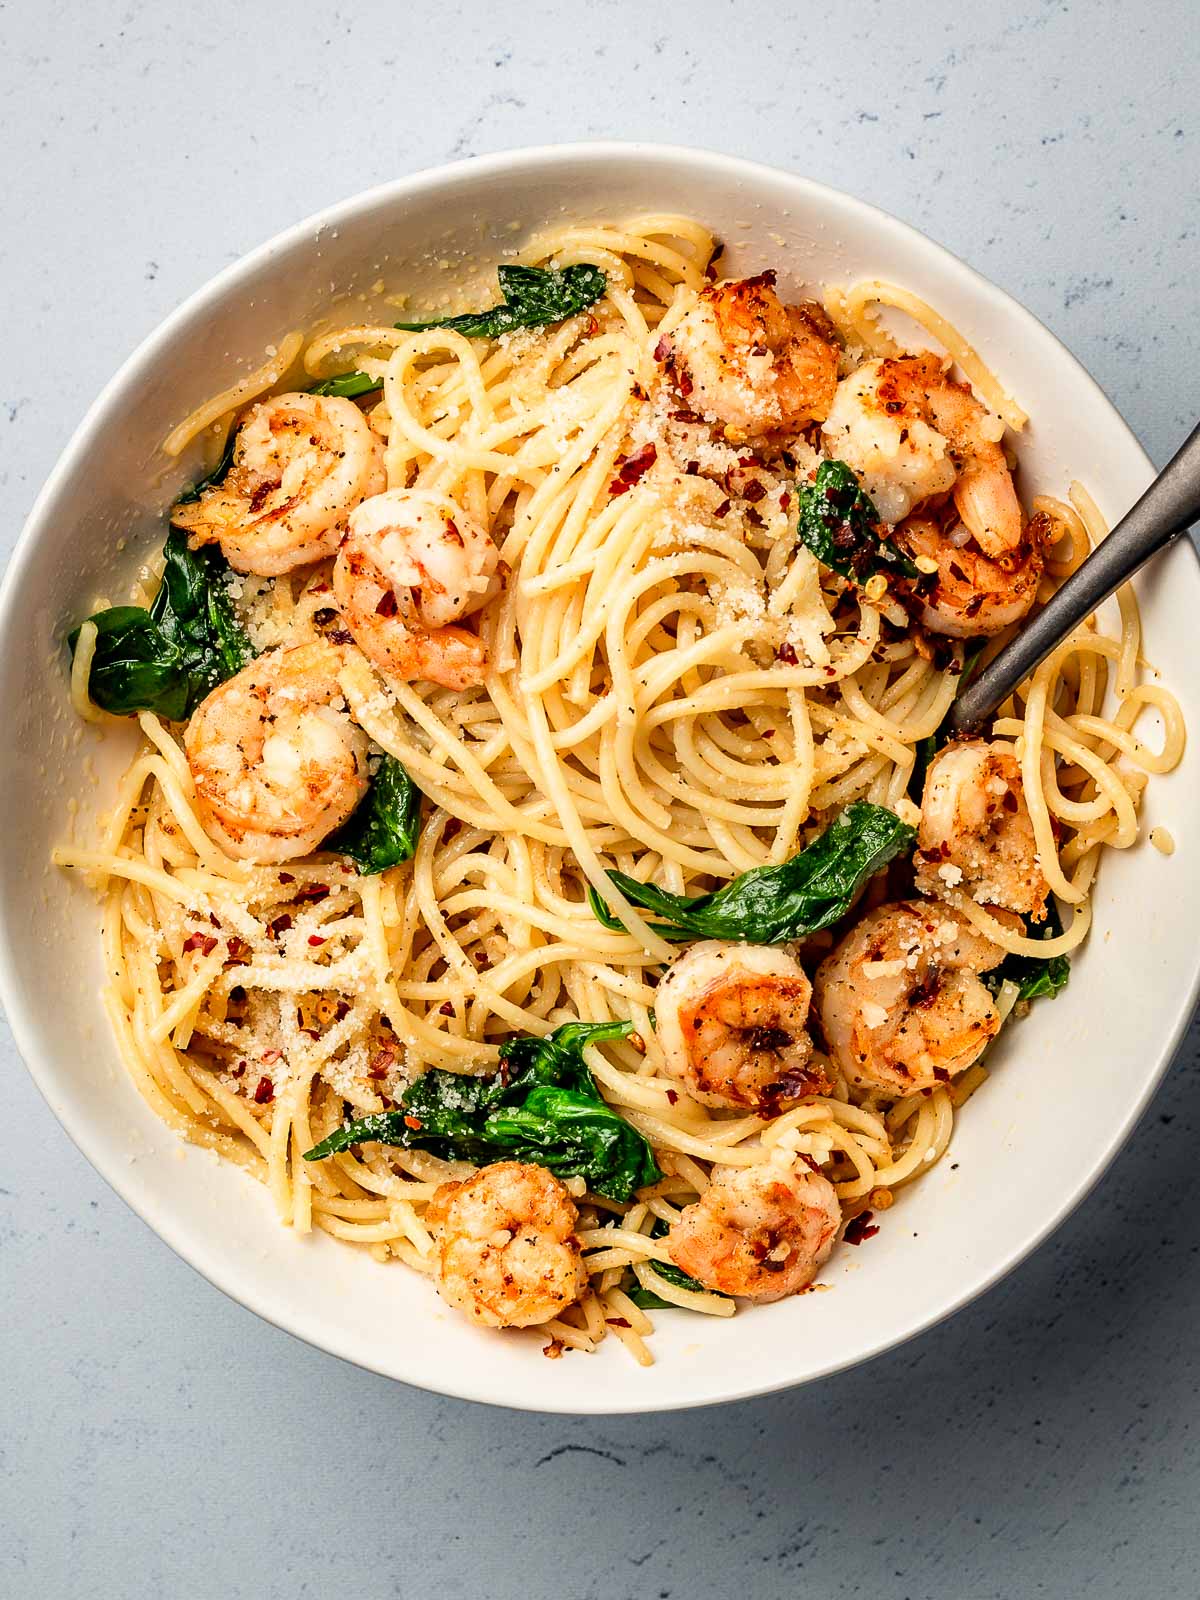 Pasta with garlic butter shrimp in a bowl.